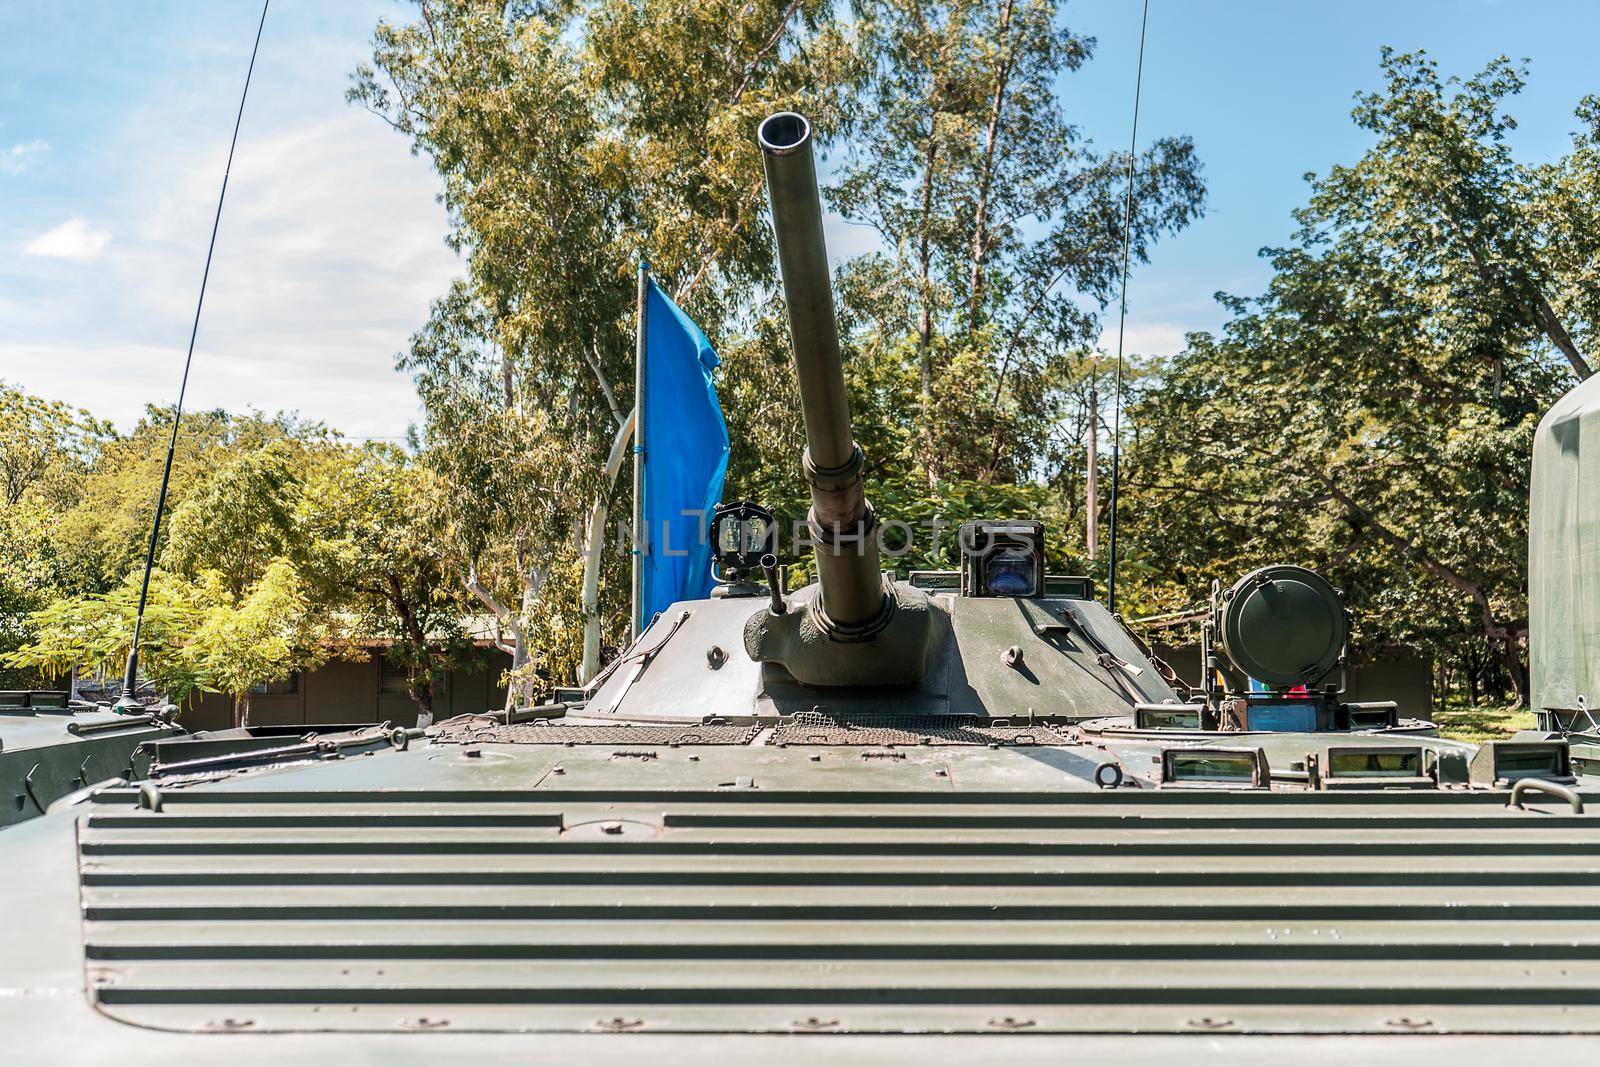 Russian military tank turret parked and ready for combat by cfalvarez